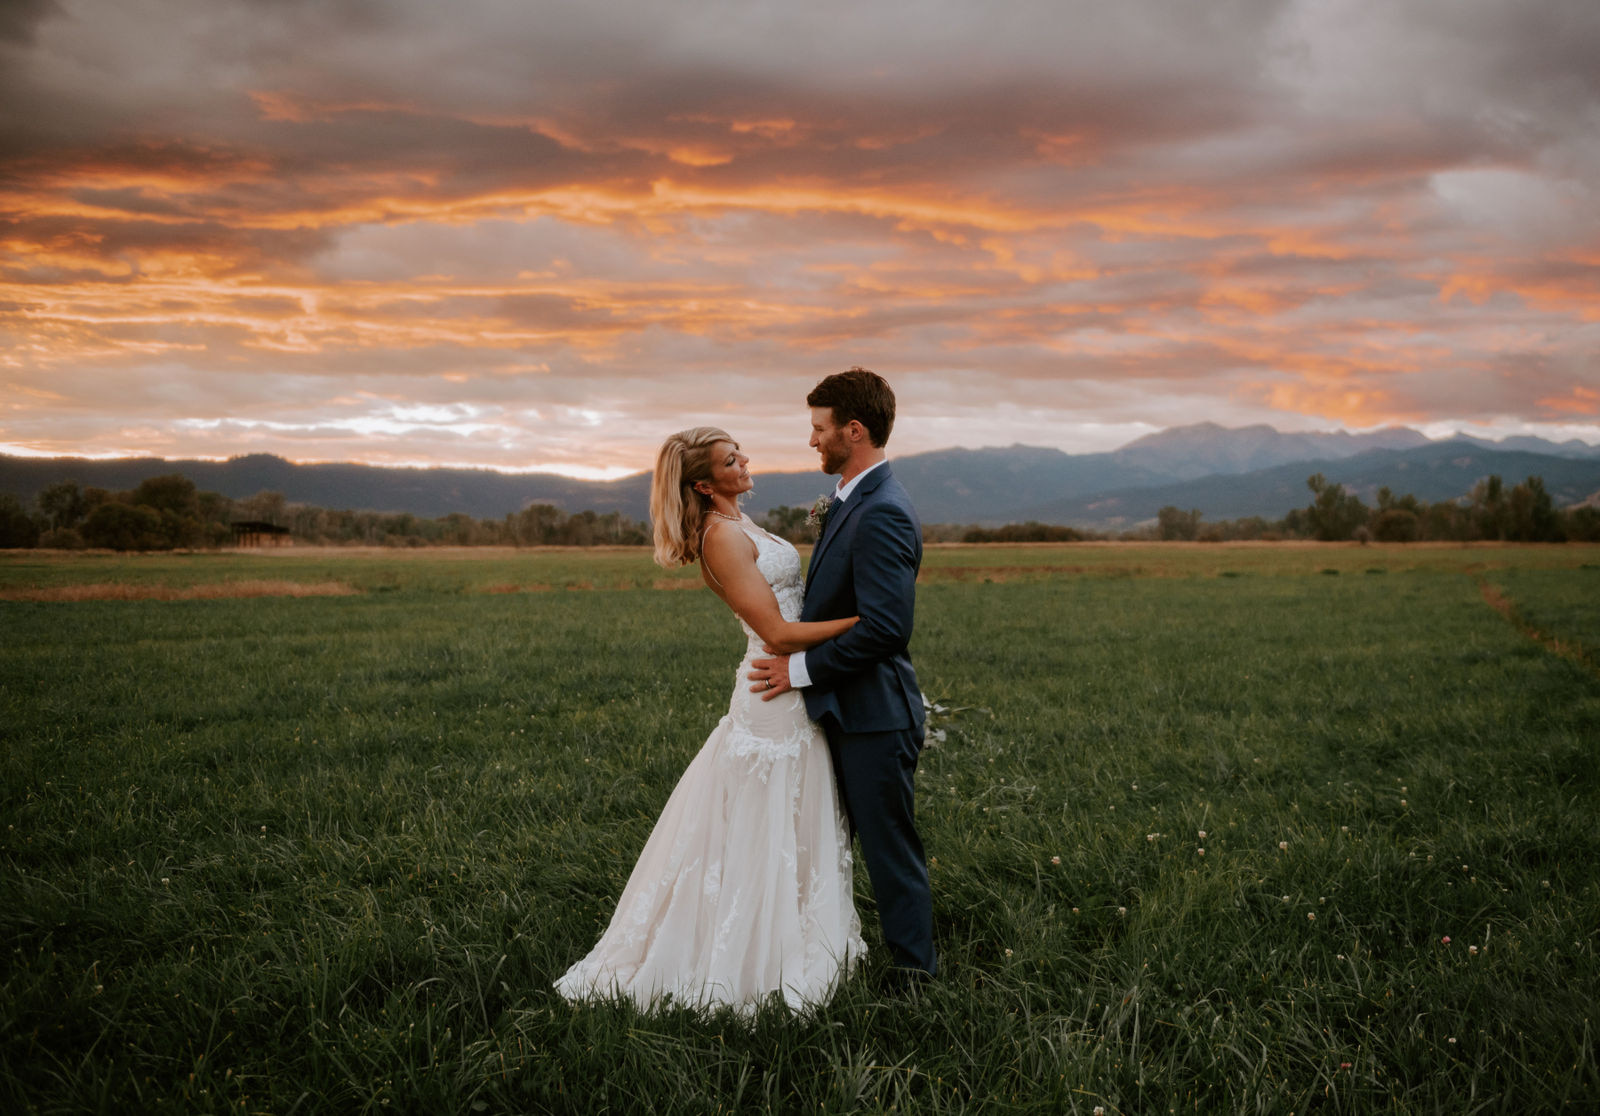 Bride and groom embracing under the autumn sunset at the base of the wallowa mountains.